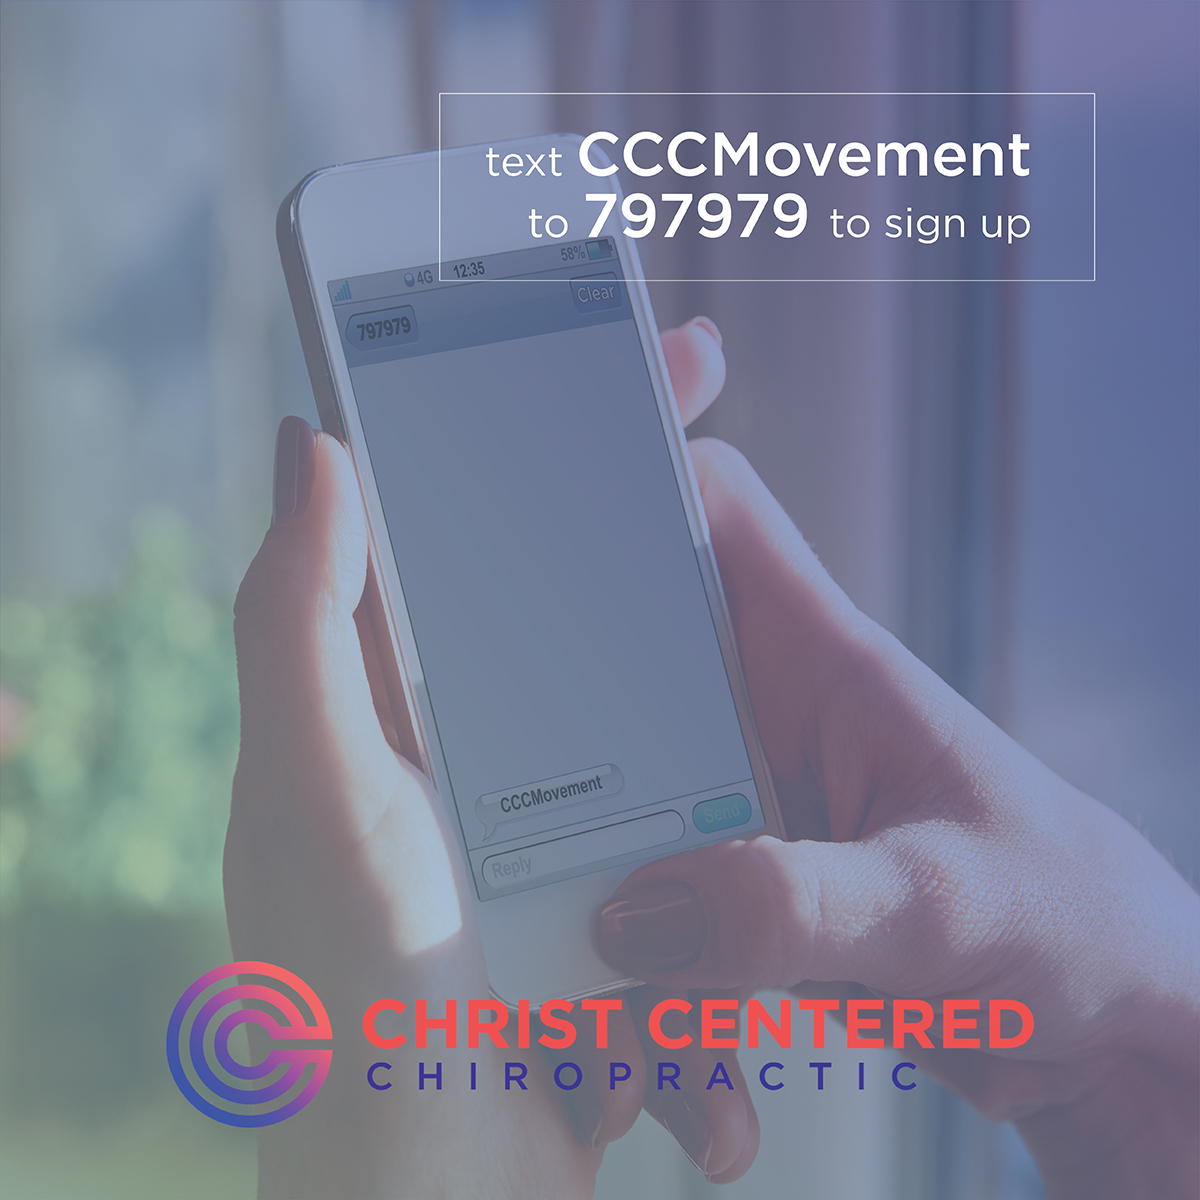 Text CCCMovement to 797979